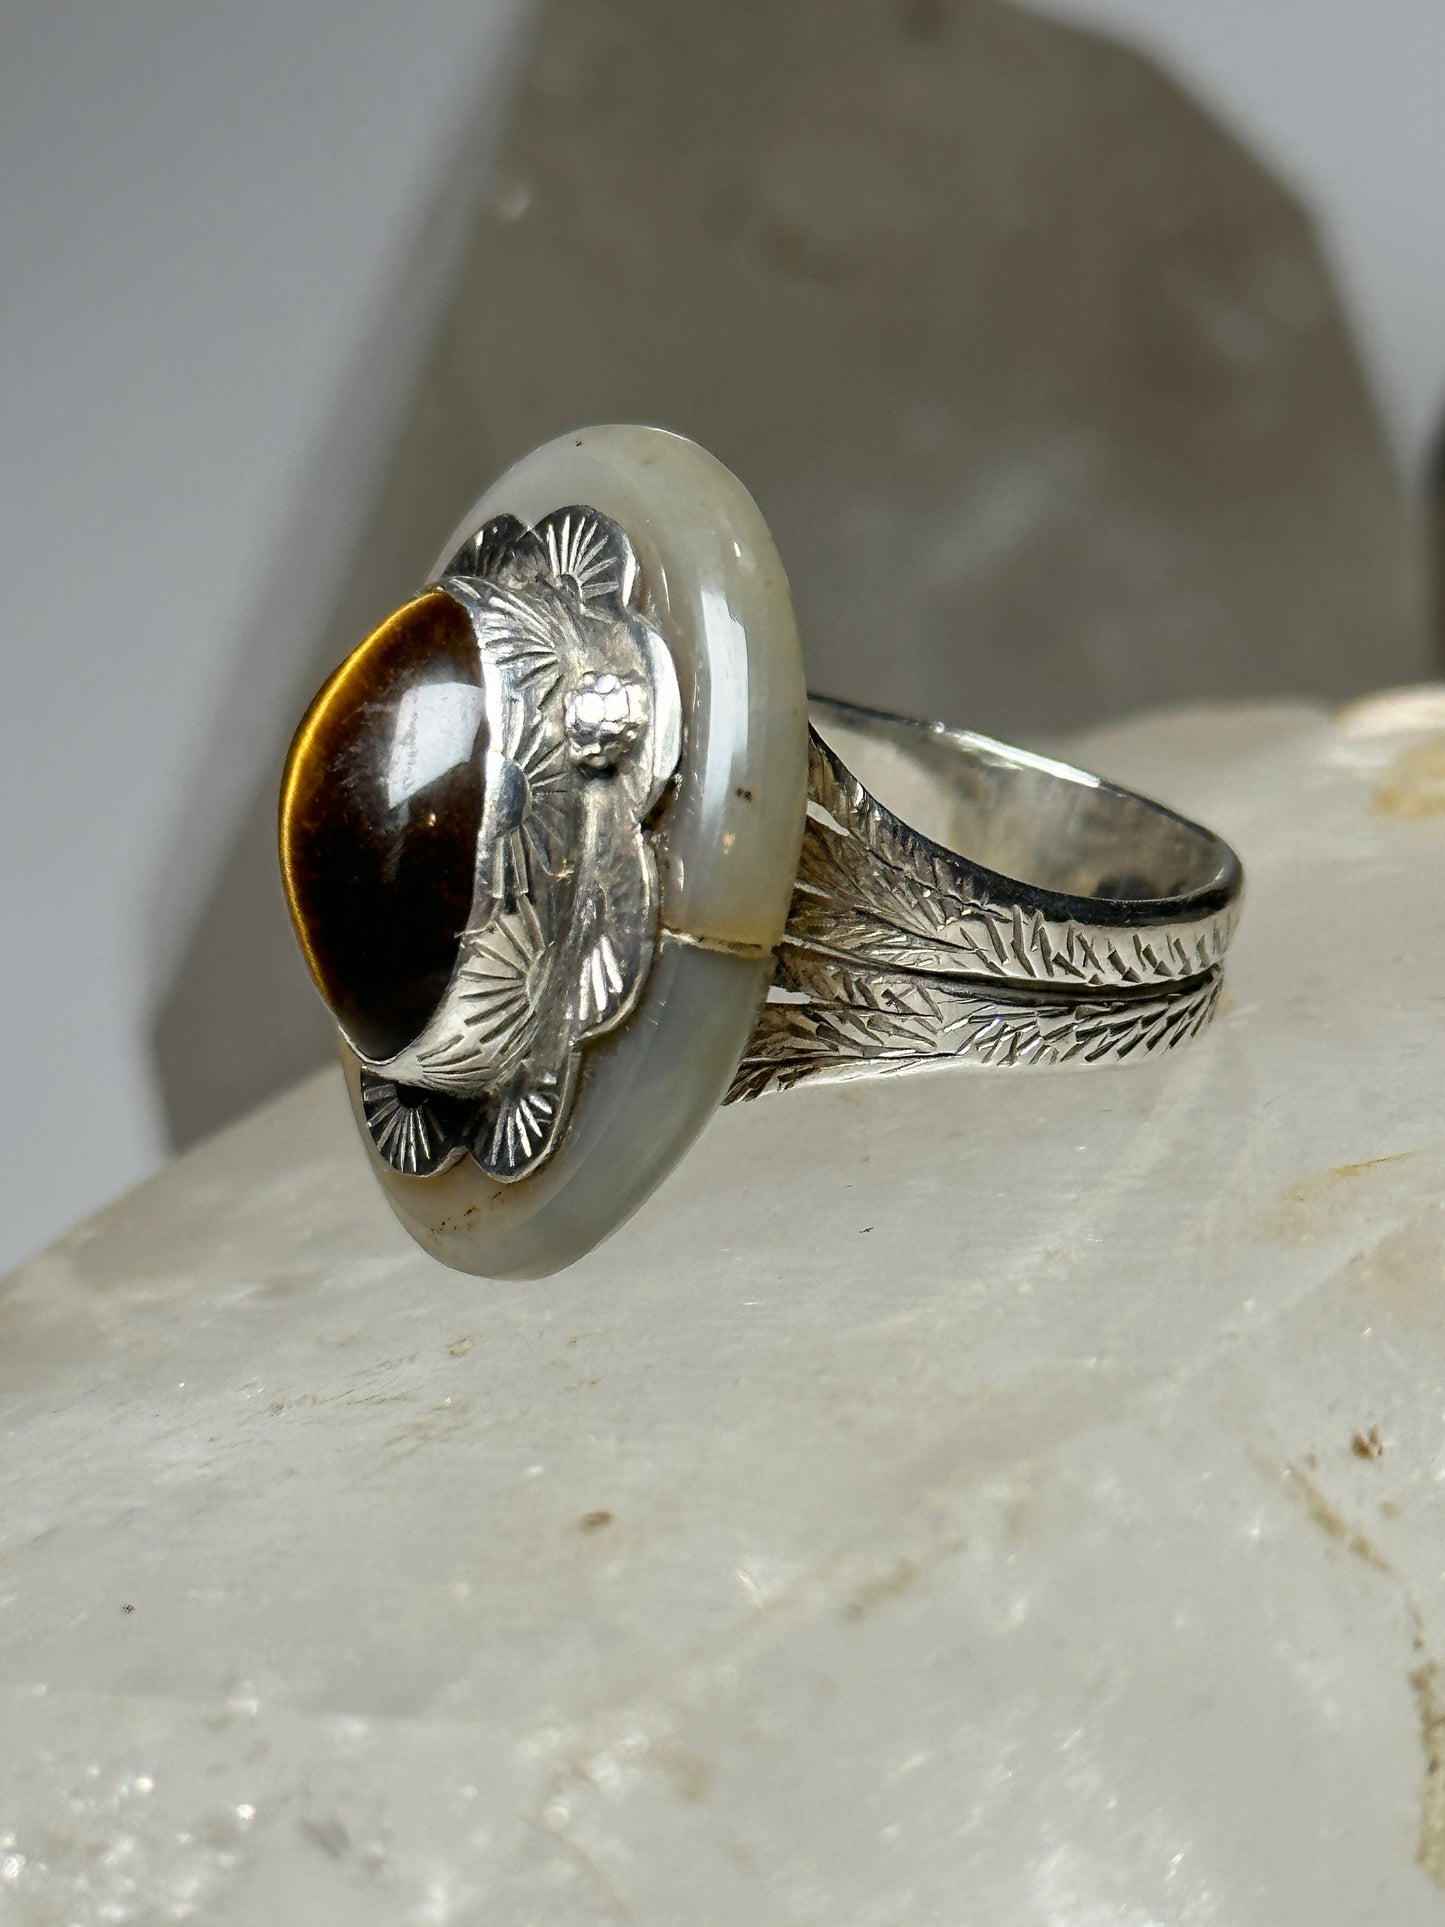 Tiger Eye ring Floral agate  band size 7.50 sterling silver women